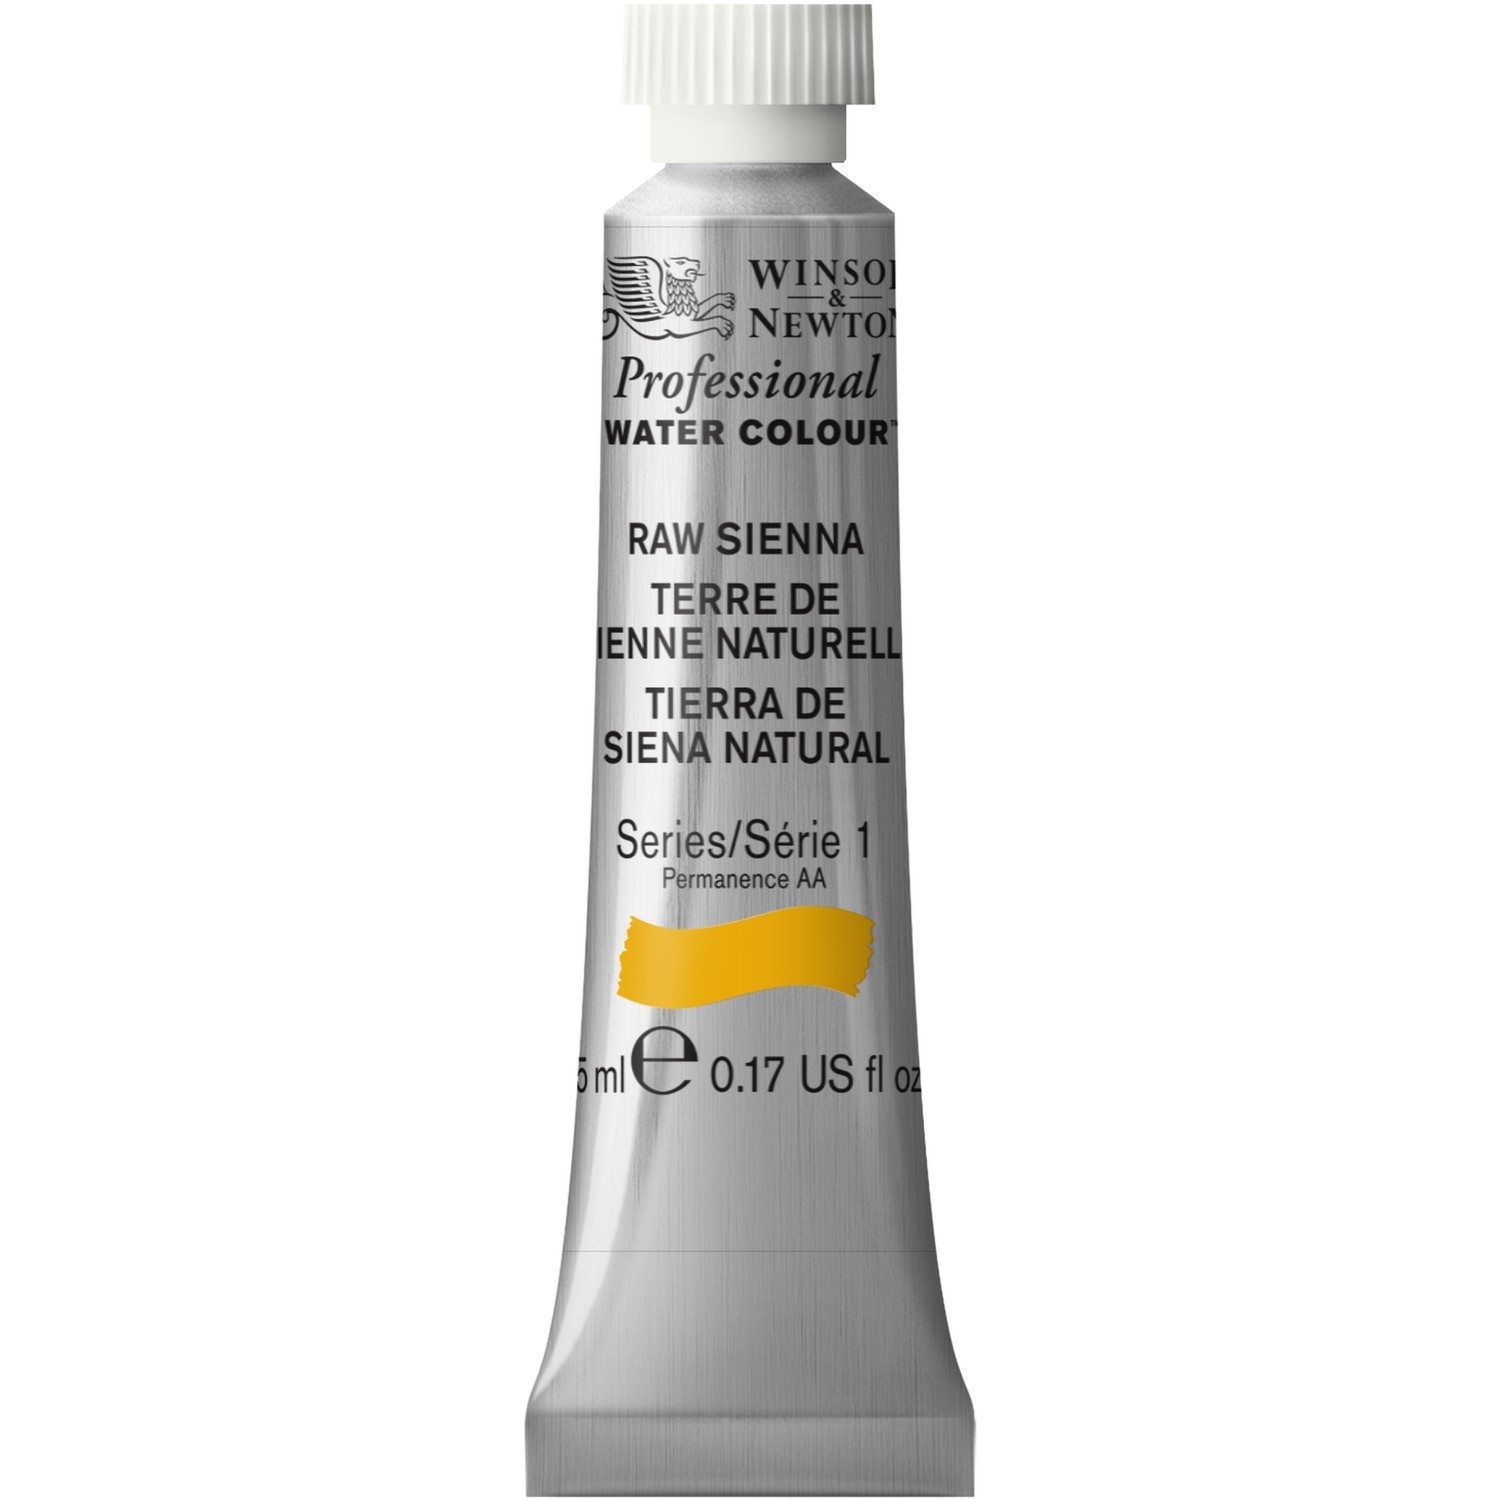 Winsor and Newton 5ml Professional Watercolour Paint - Raw Sienna Image 1